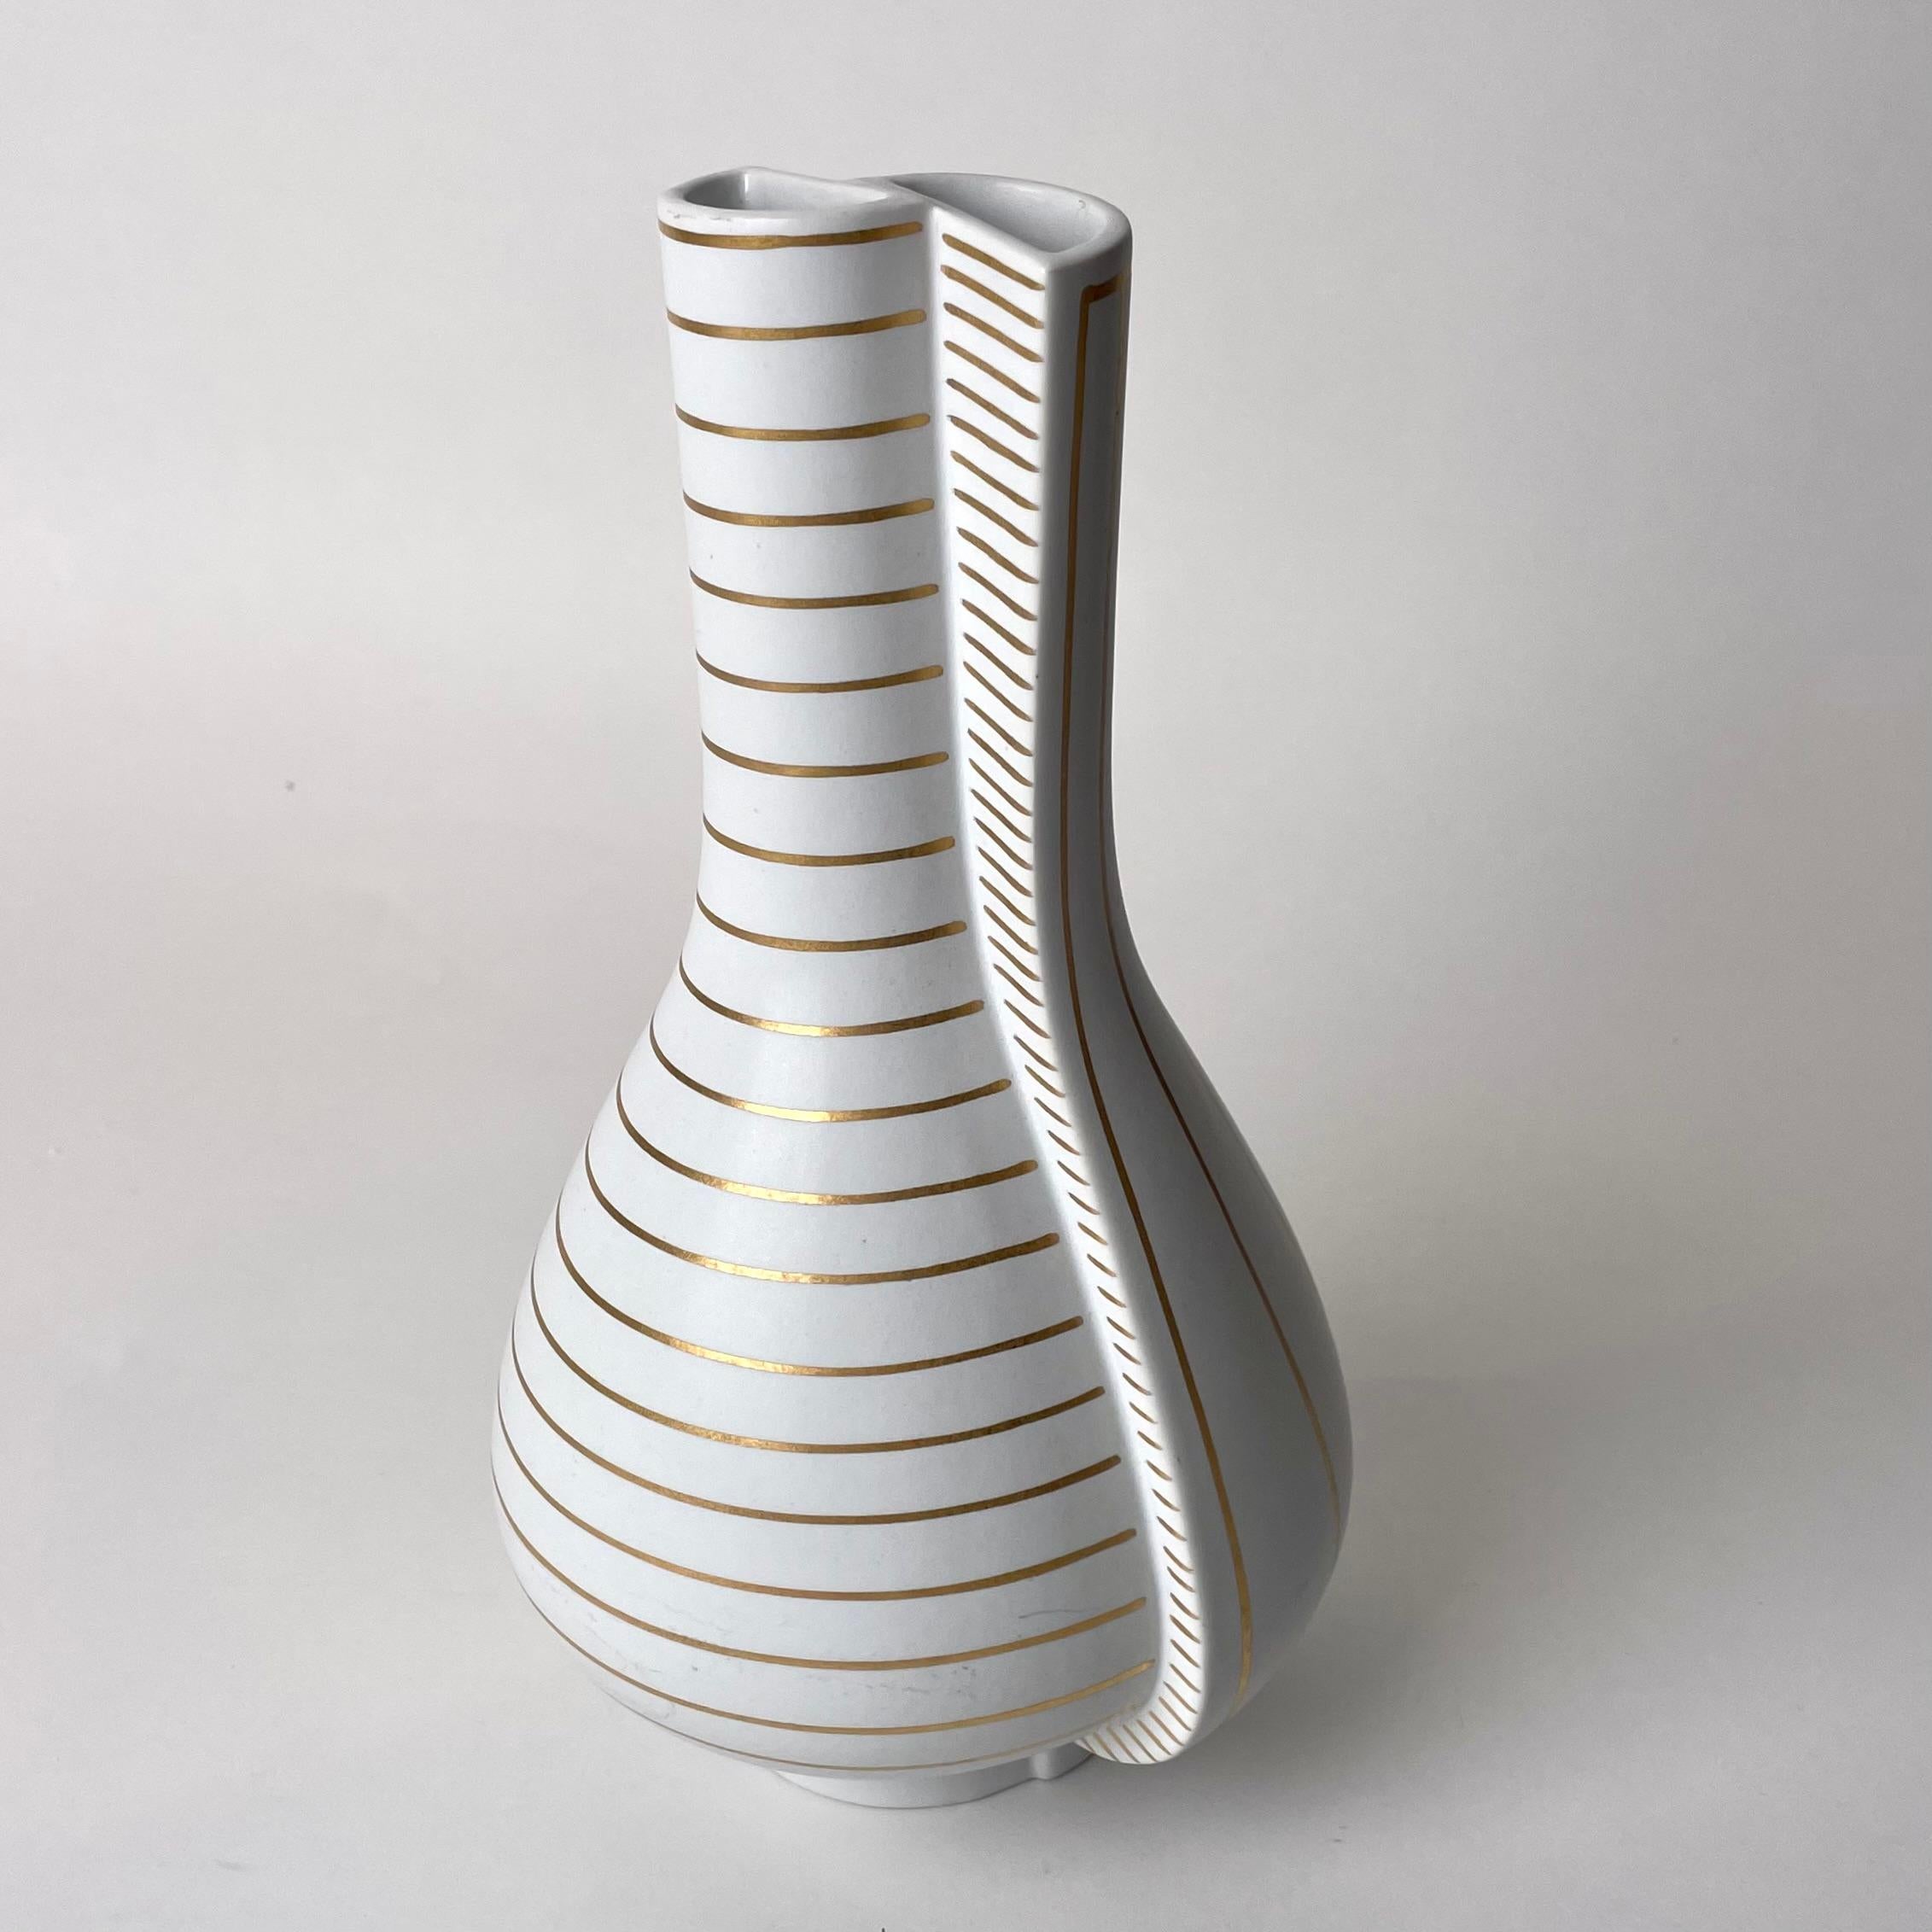 Beautiful Double Vase in Stoneware called ”Guldsurrea” and designed 1939 by Wilhelm Kåge (1889-1960). Made at Gustavsberg Studio in Sweden.

Wilhelm Kåge was artistic director at the the Gustavsberg Porcelain Factory between the years